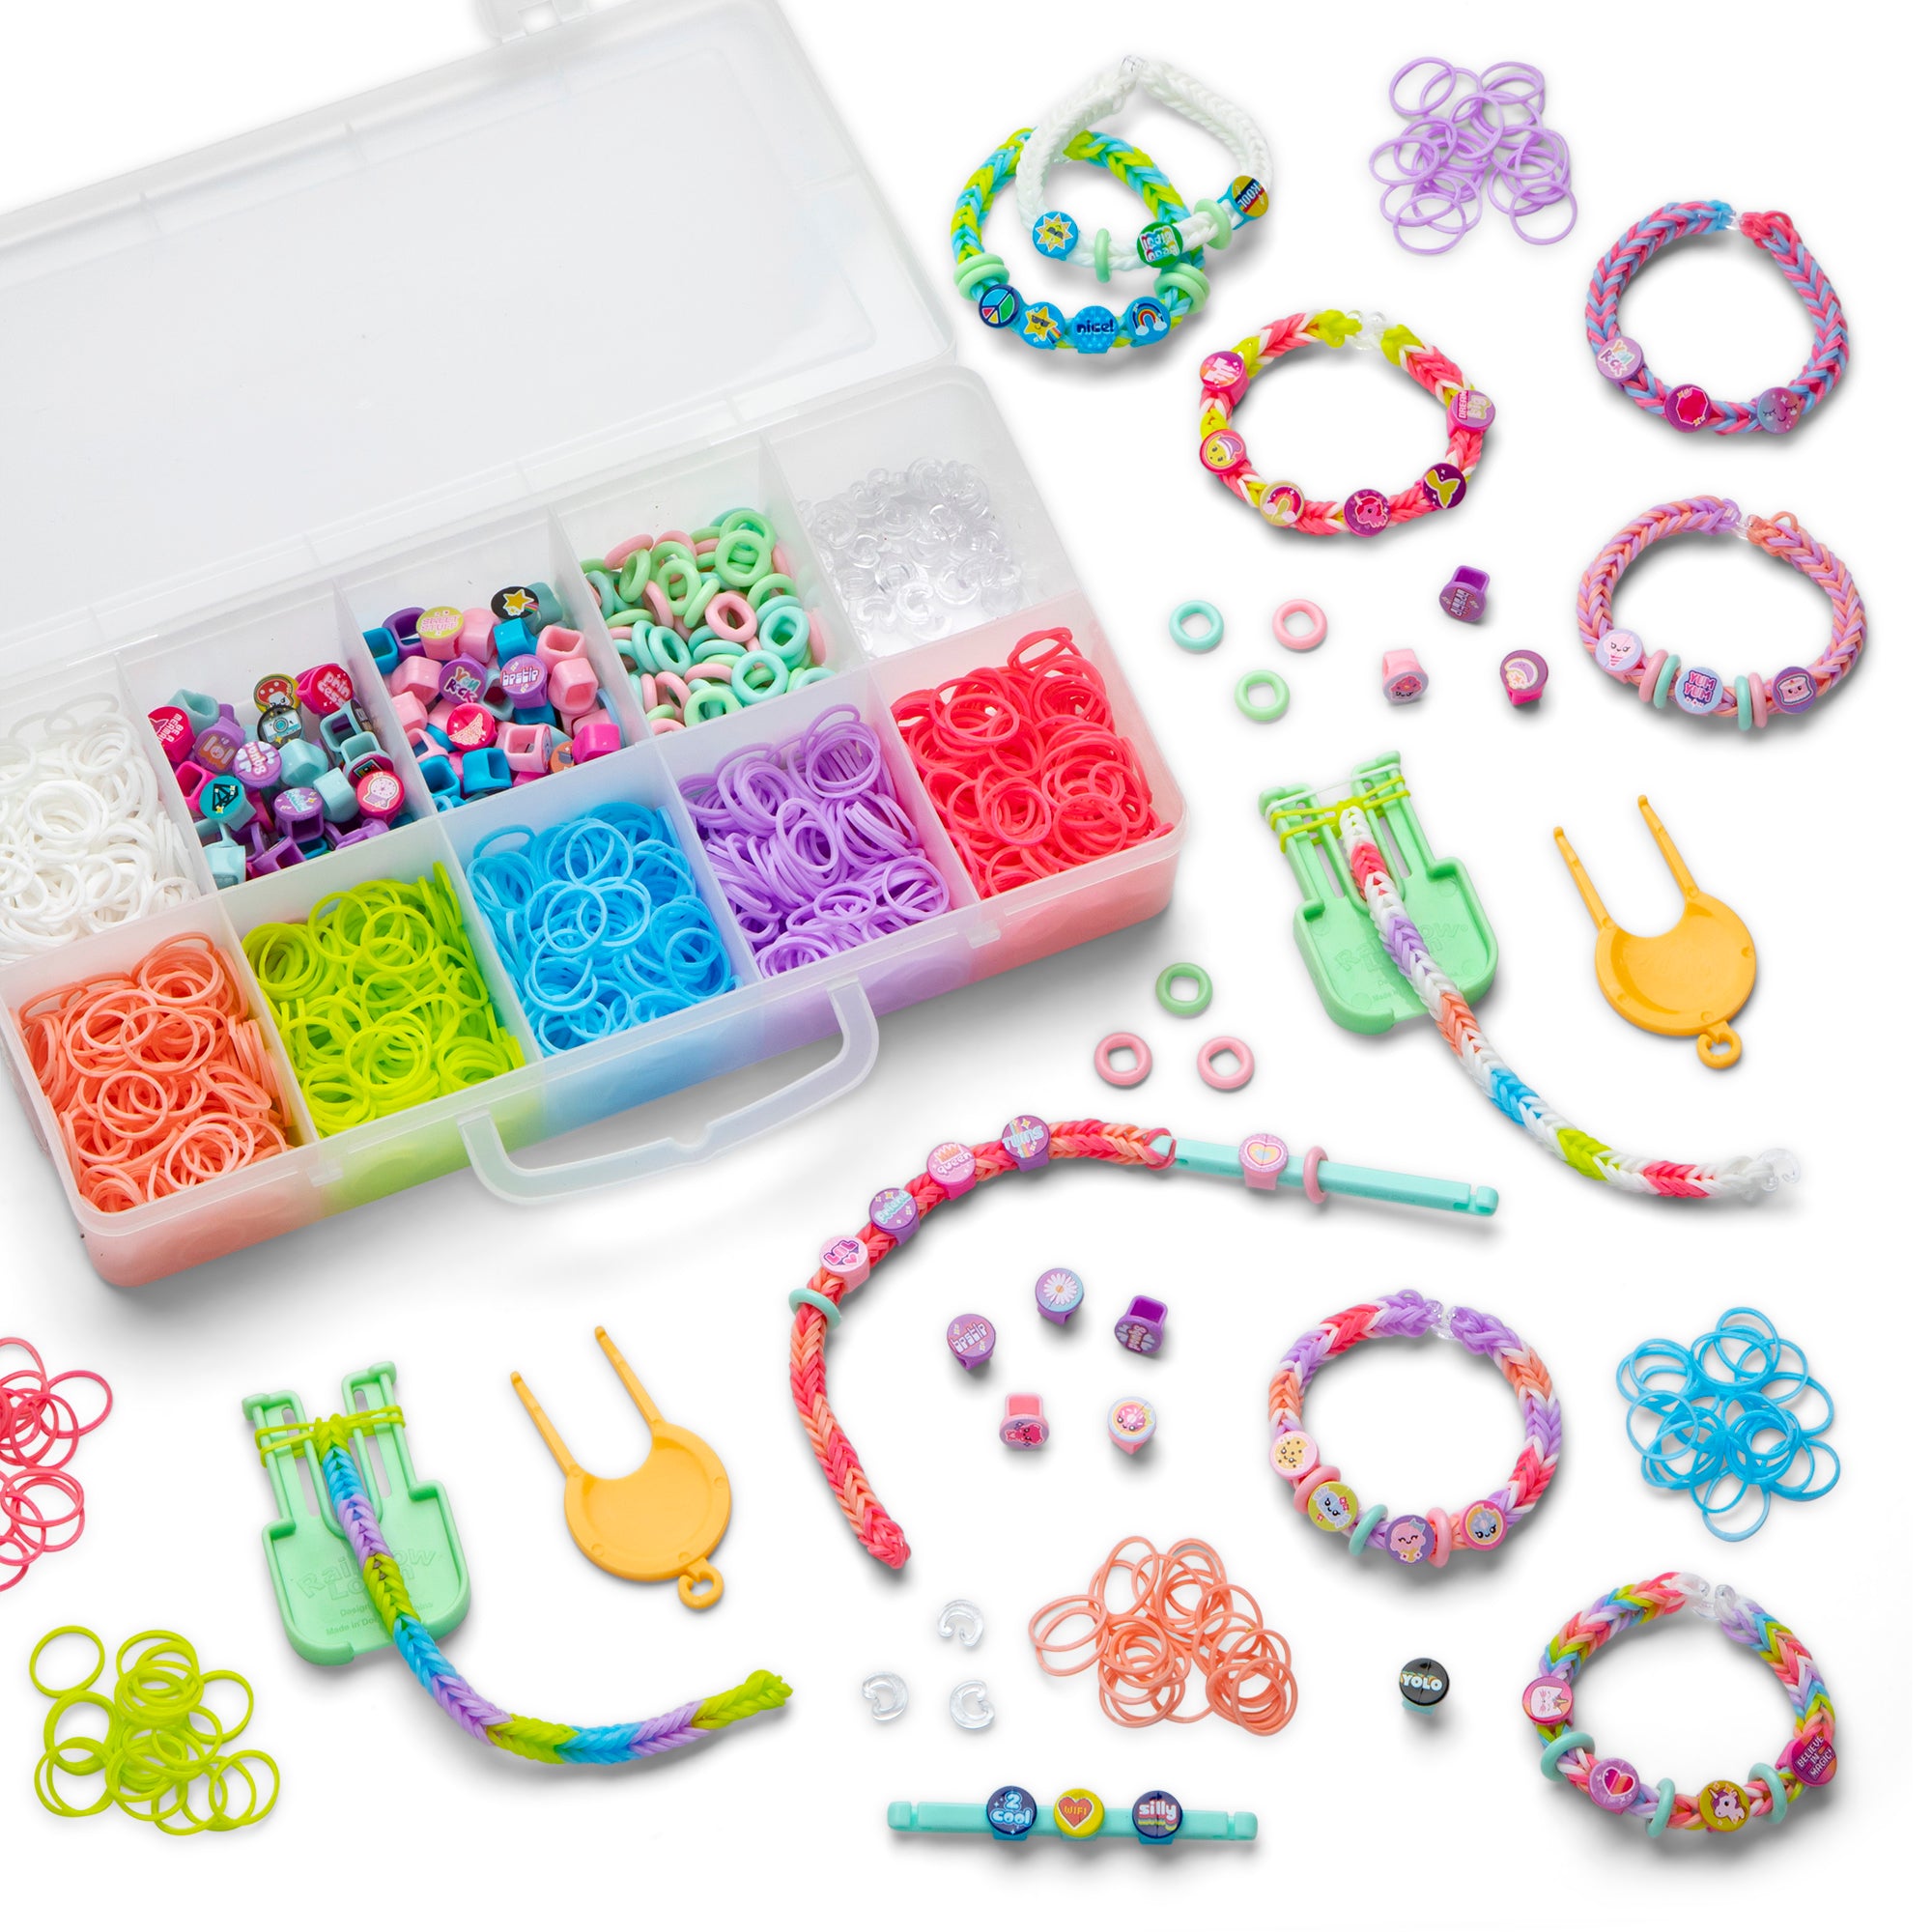 1581+ Loom Bands Kit in 30 Variety Colors, Yowamho Rubber Band Bracelet Kit  for Kids Weaving DIY Crafting Gift with Colorful Accessories for Kids Boys  & Girls : Amazon.in: Toys & Games